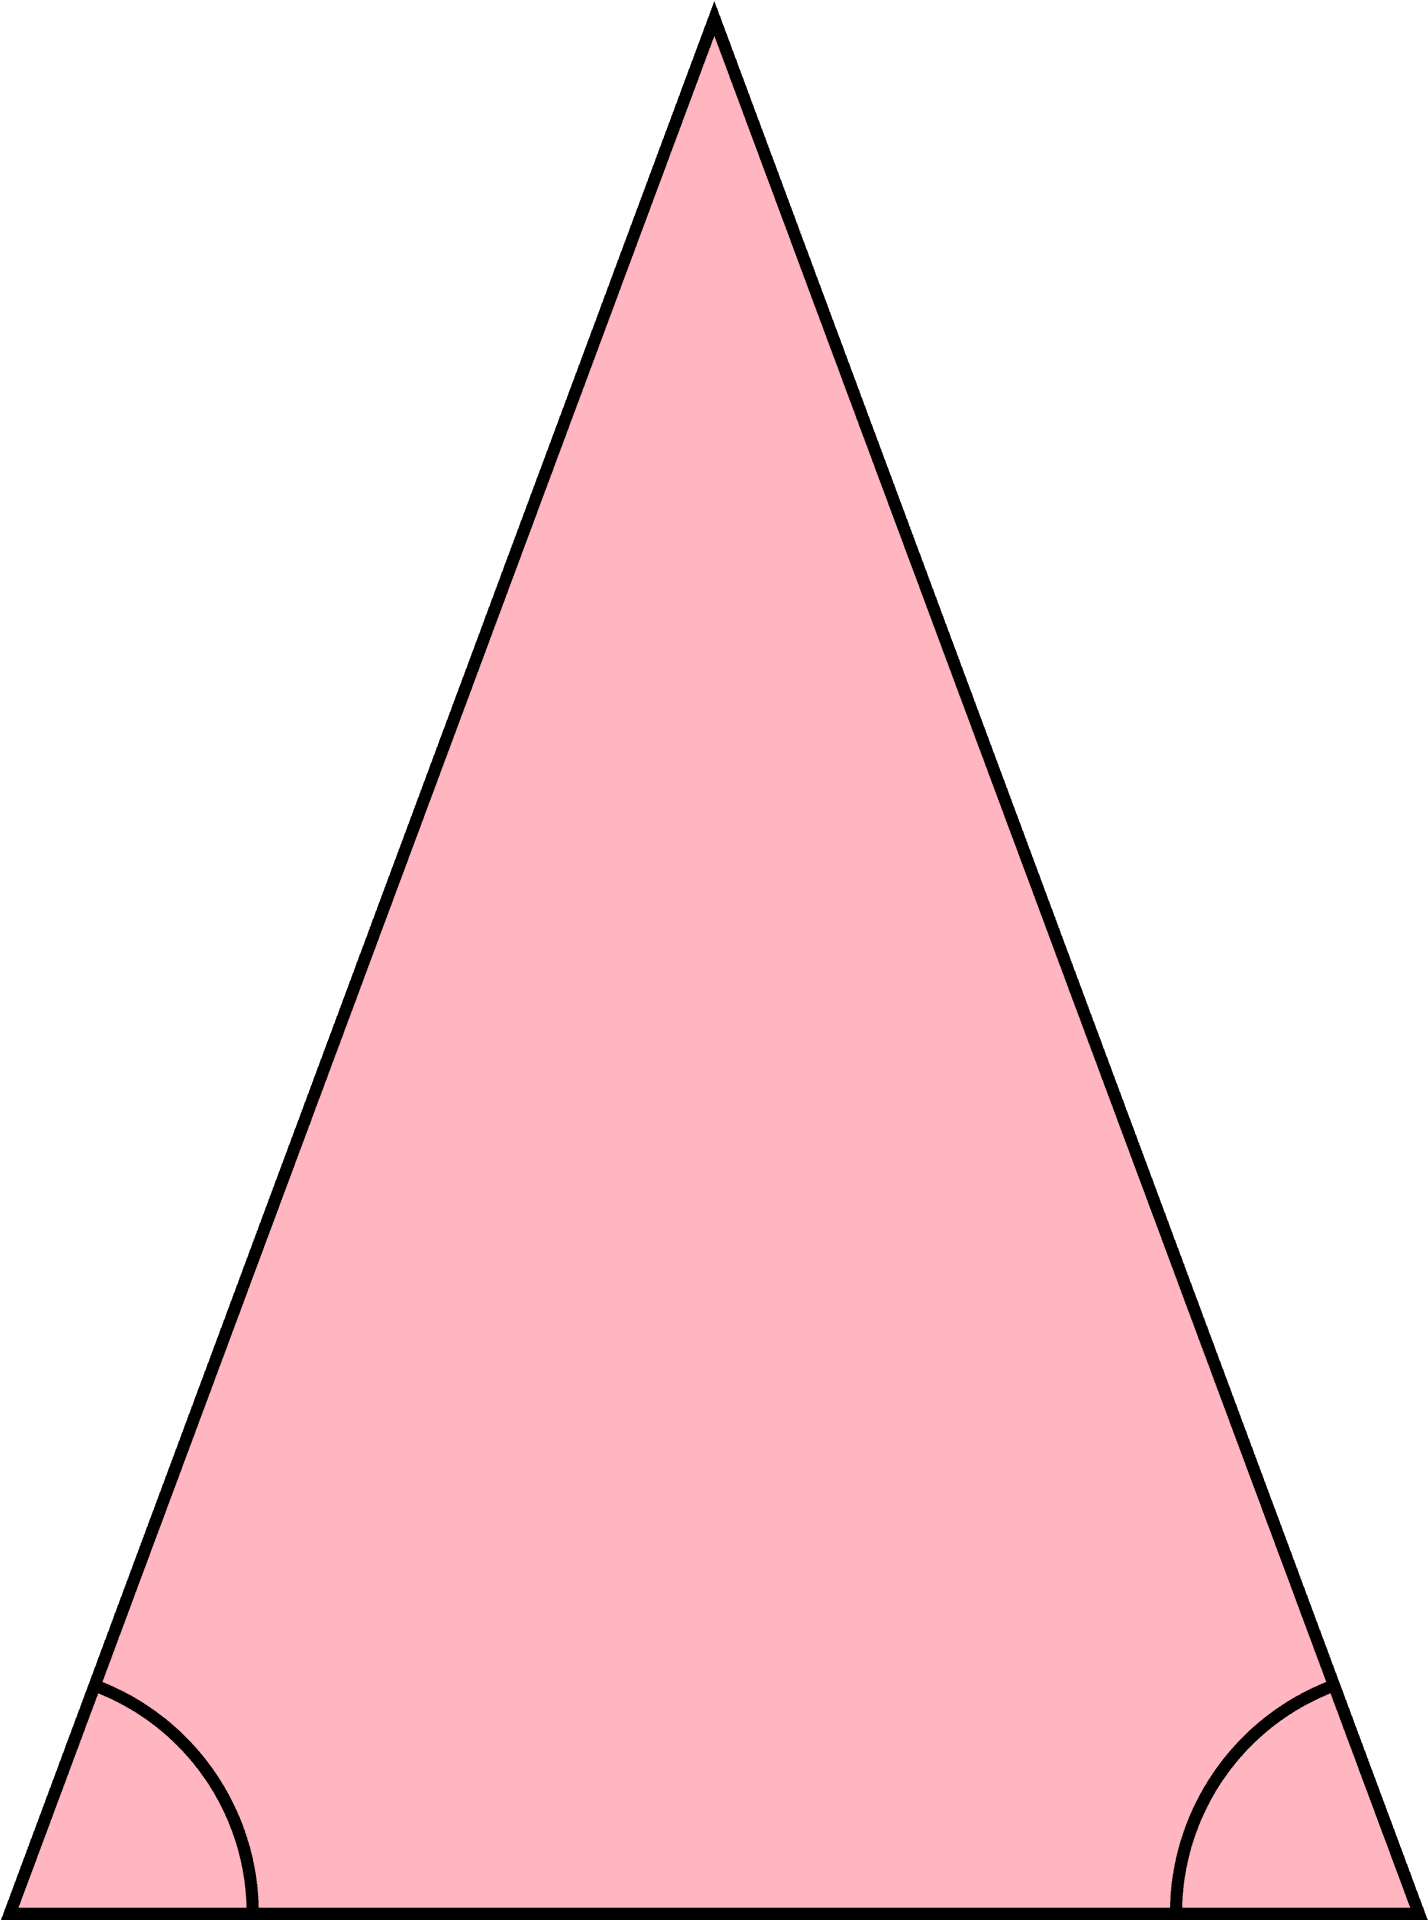 Pink Triangle Graphic PNG image